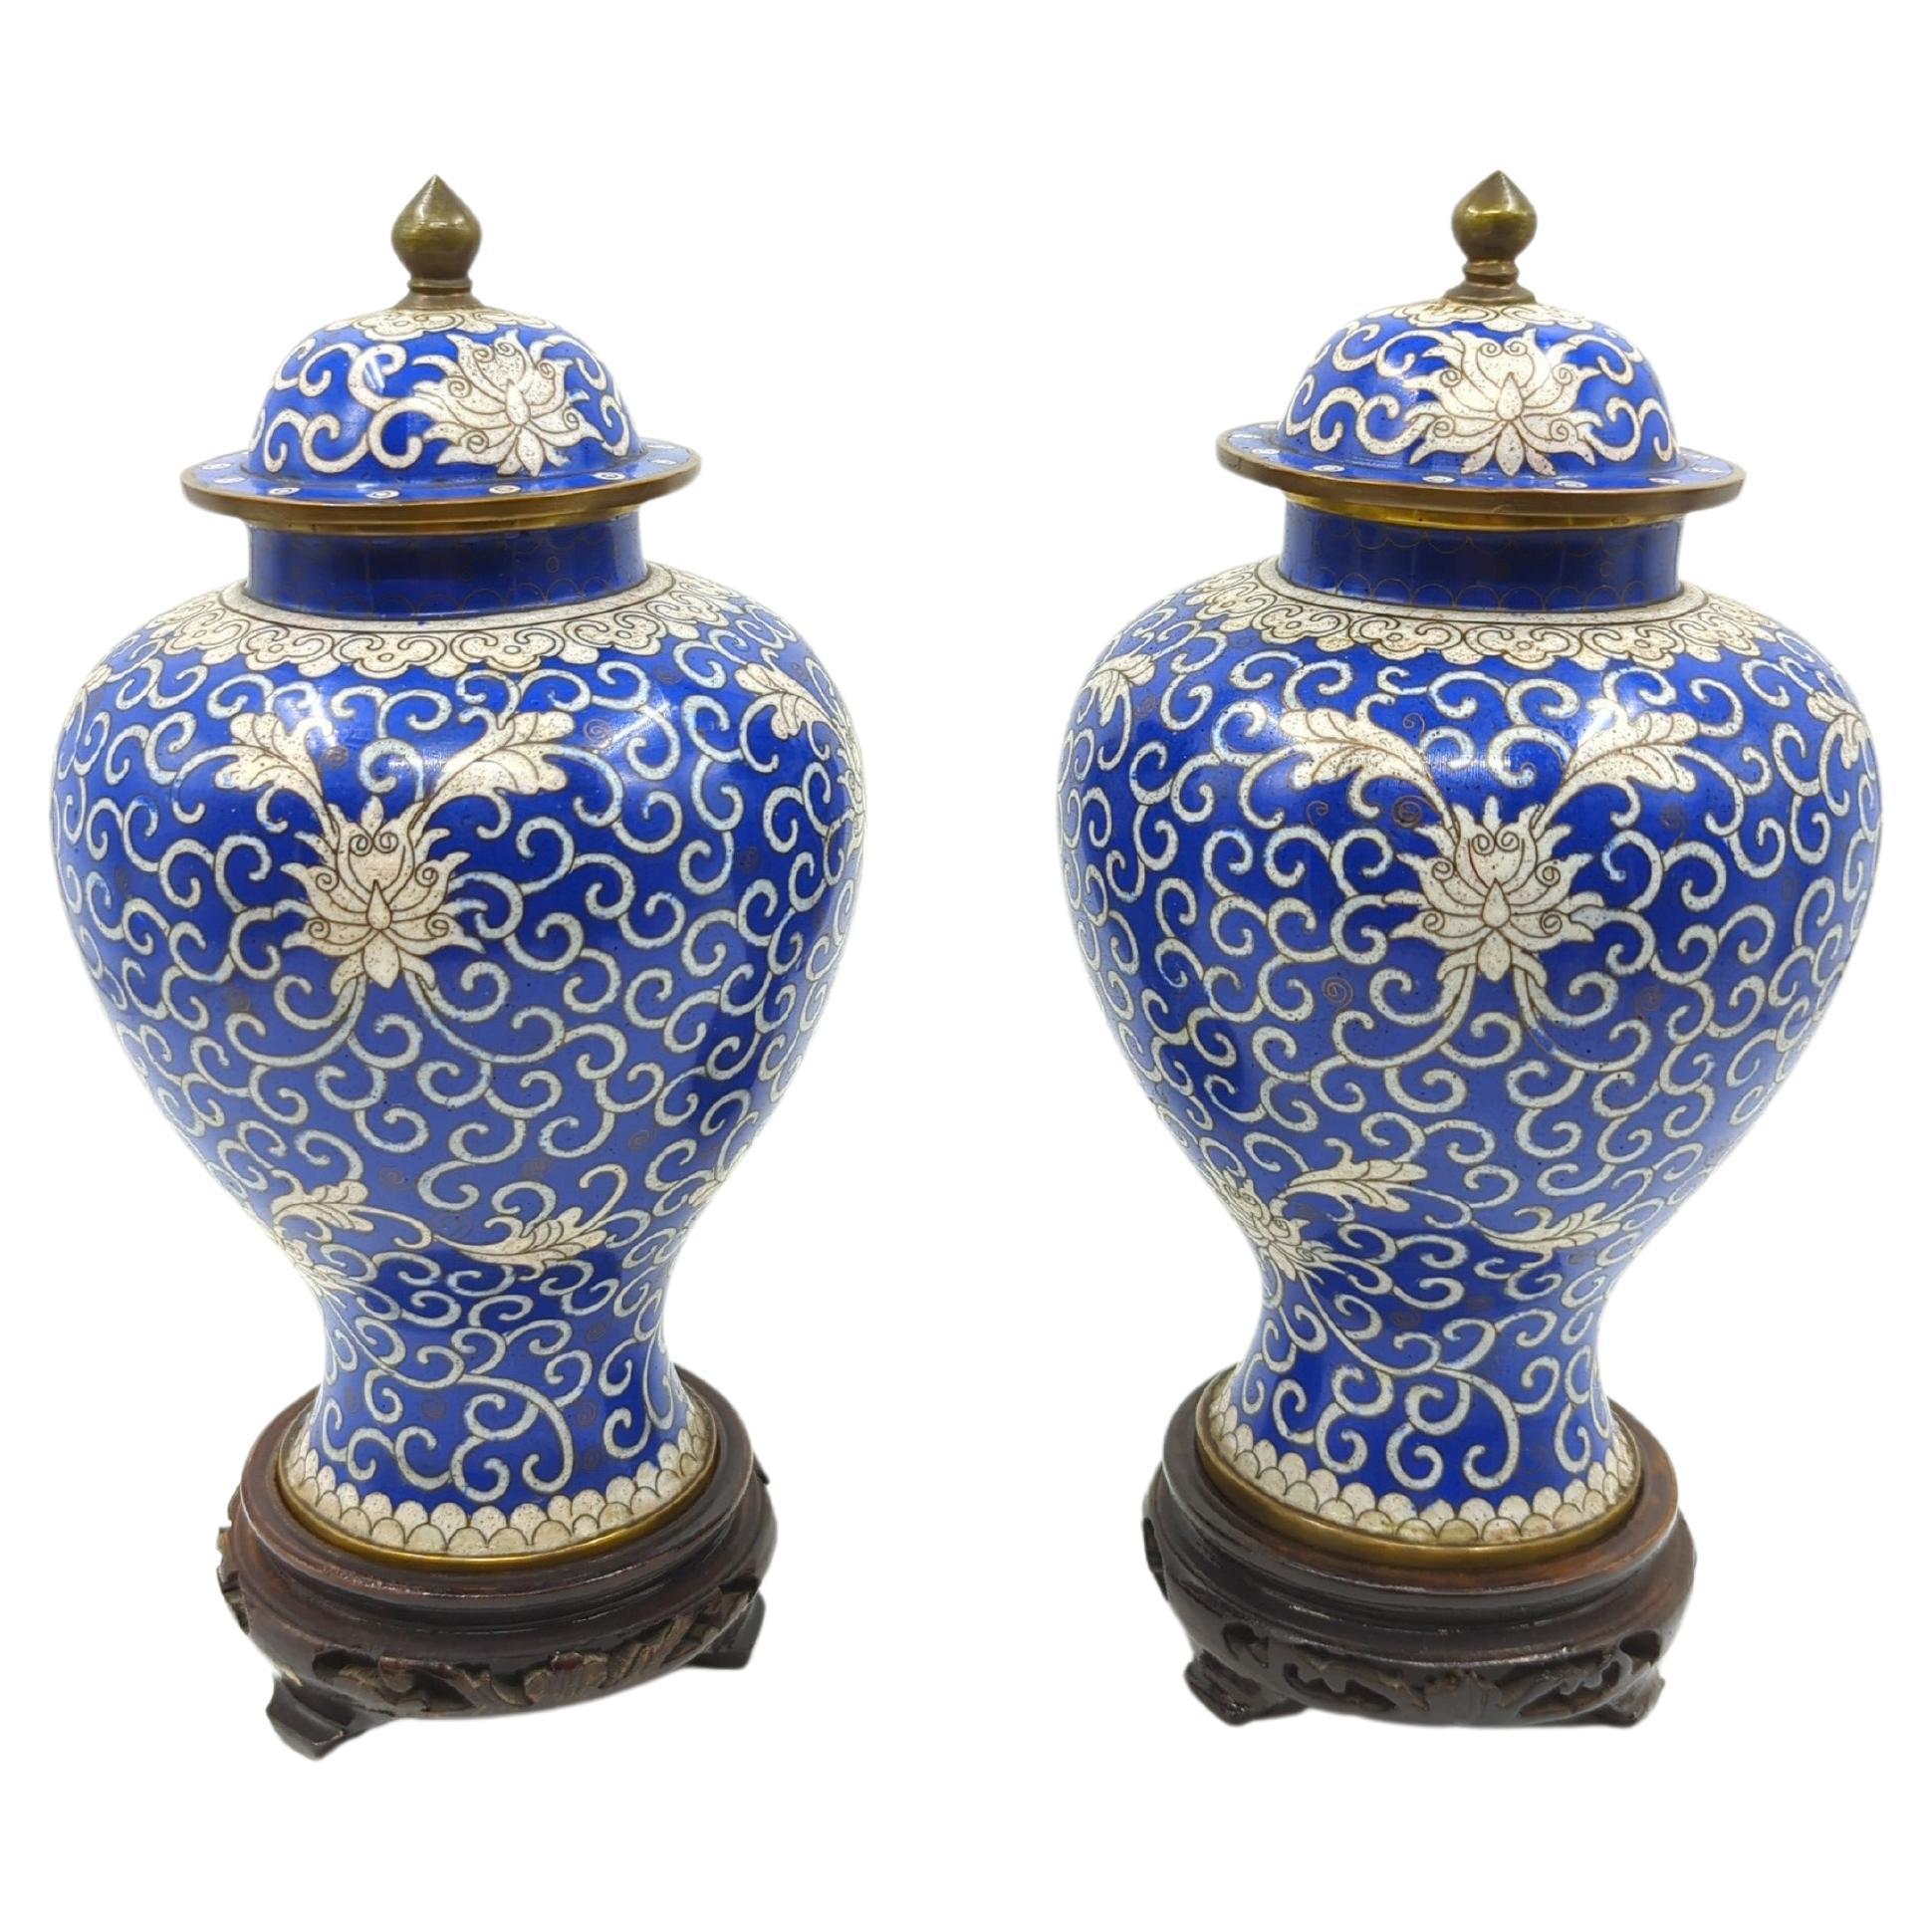 This exquisite matching pair of antique Chinese export blue and white cloisonné covered general jars is a fine example of the intricate artistry and craftsmanship of traditional Chinese decorative arts. Crafted in the elegant baluster form, these